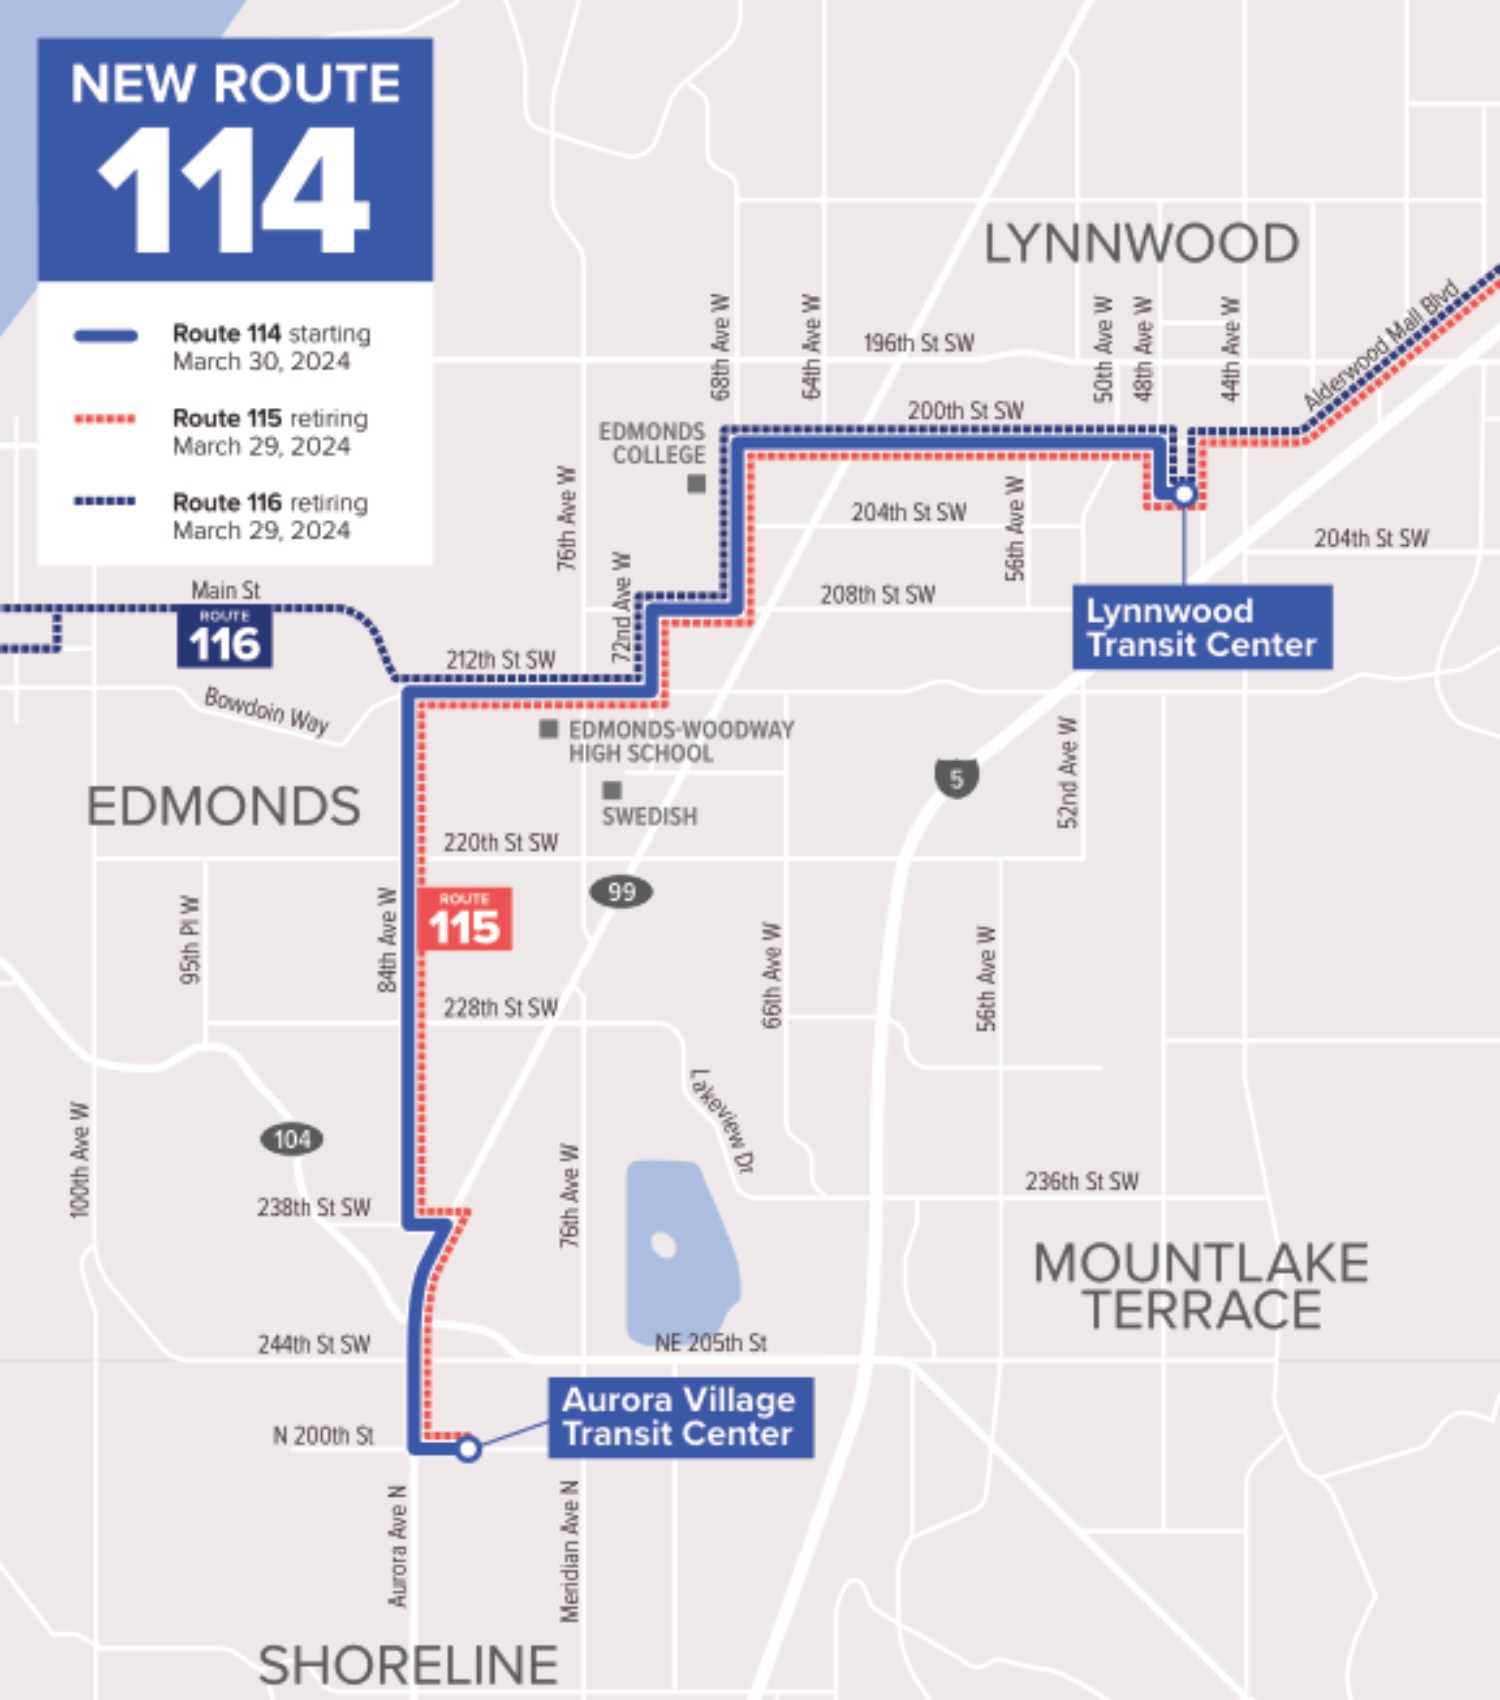 A map of the new route 114